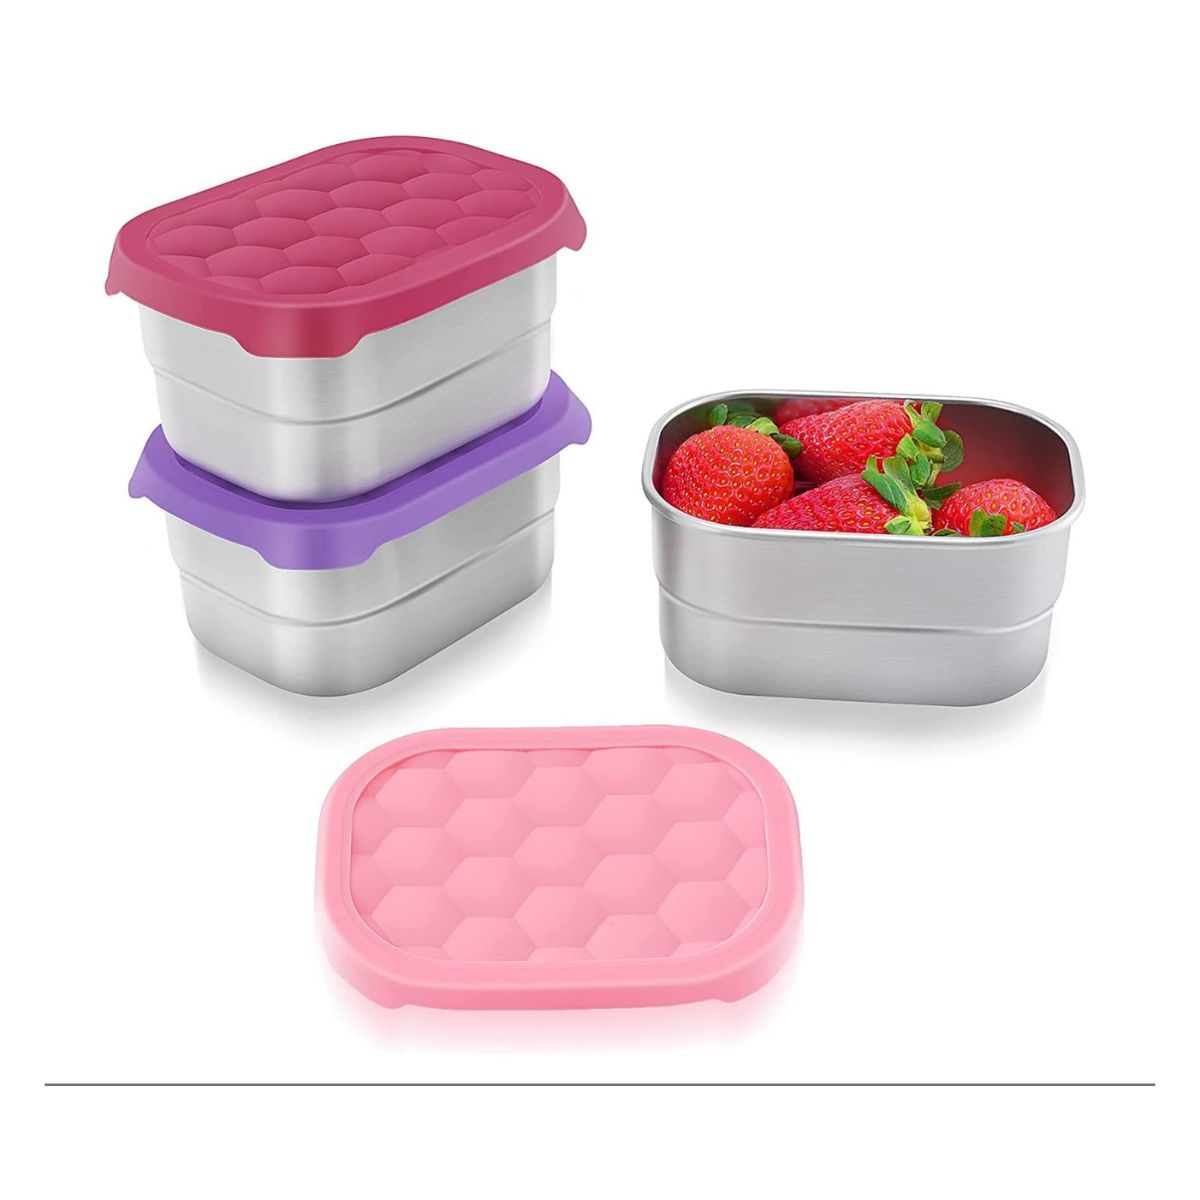 Stainless steel snack containers with silicone lids